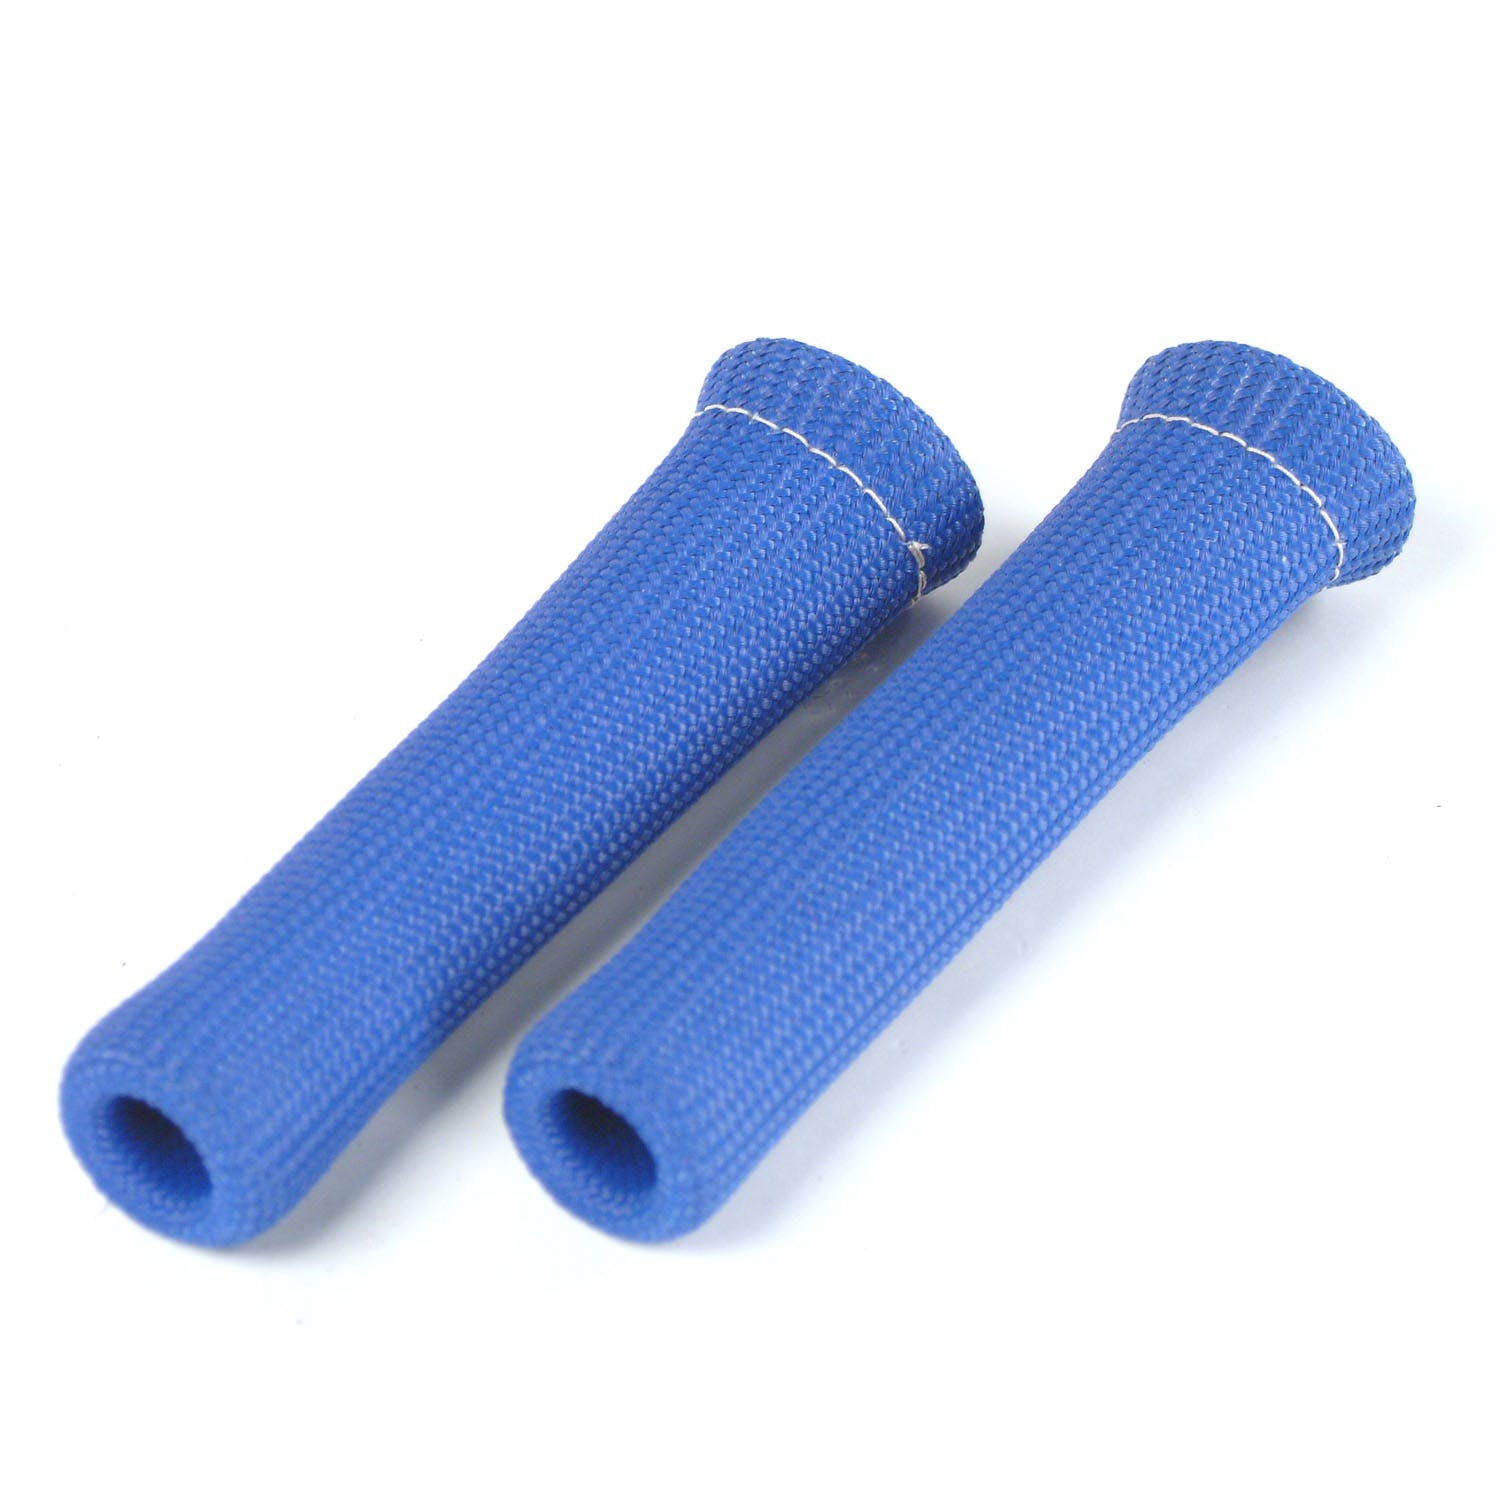 Design Engineering, Inc. 10531 Protect-A-Boot 6 Blue (2-pack)